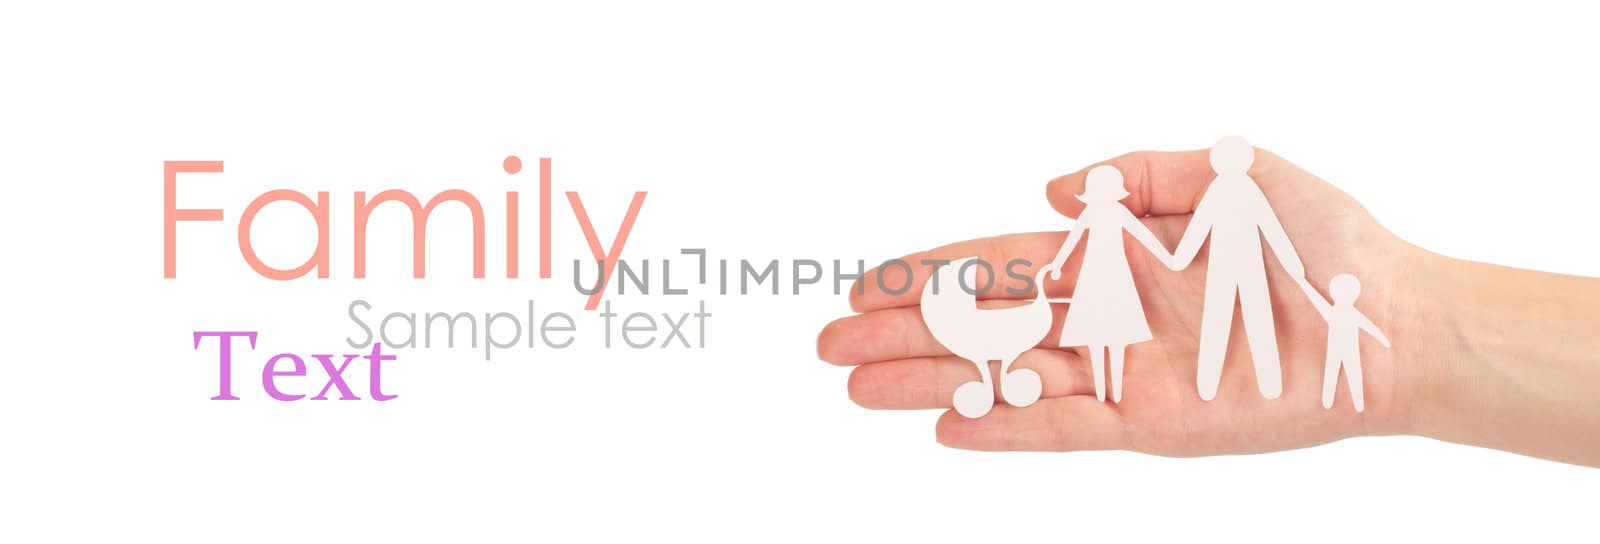 paper family in hands isolated on white by oly5